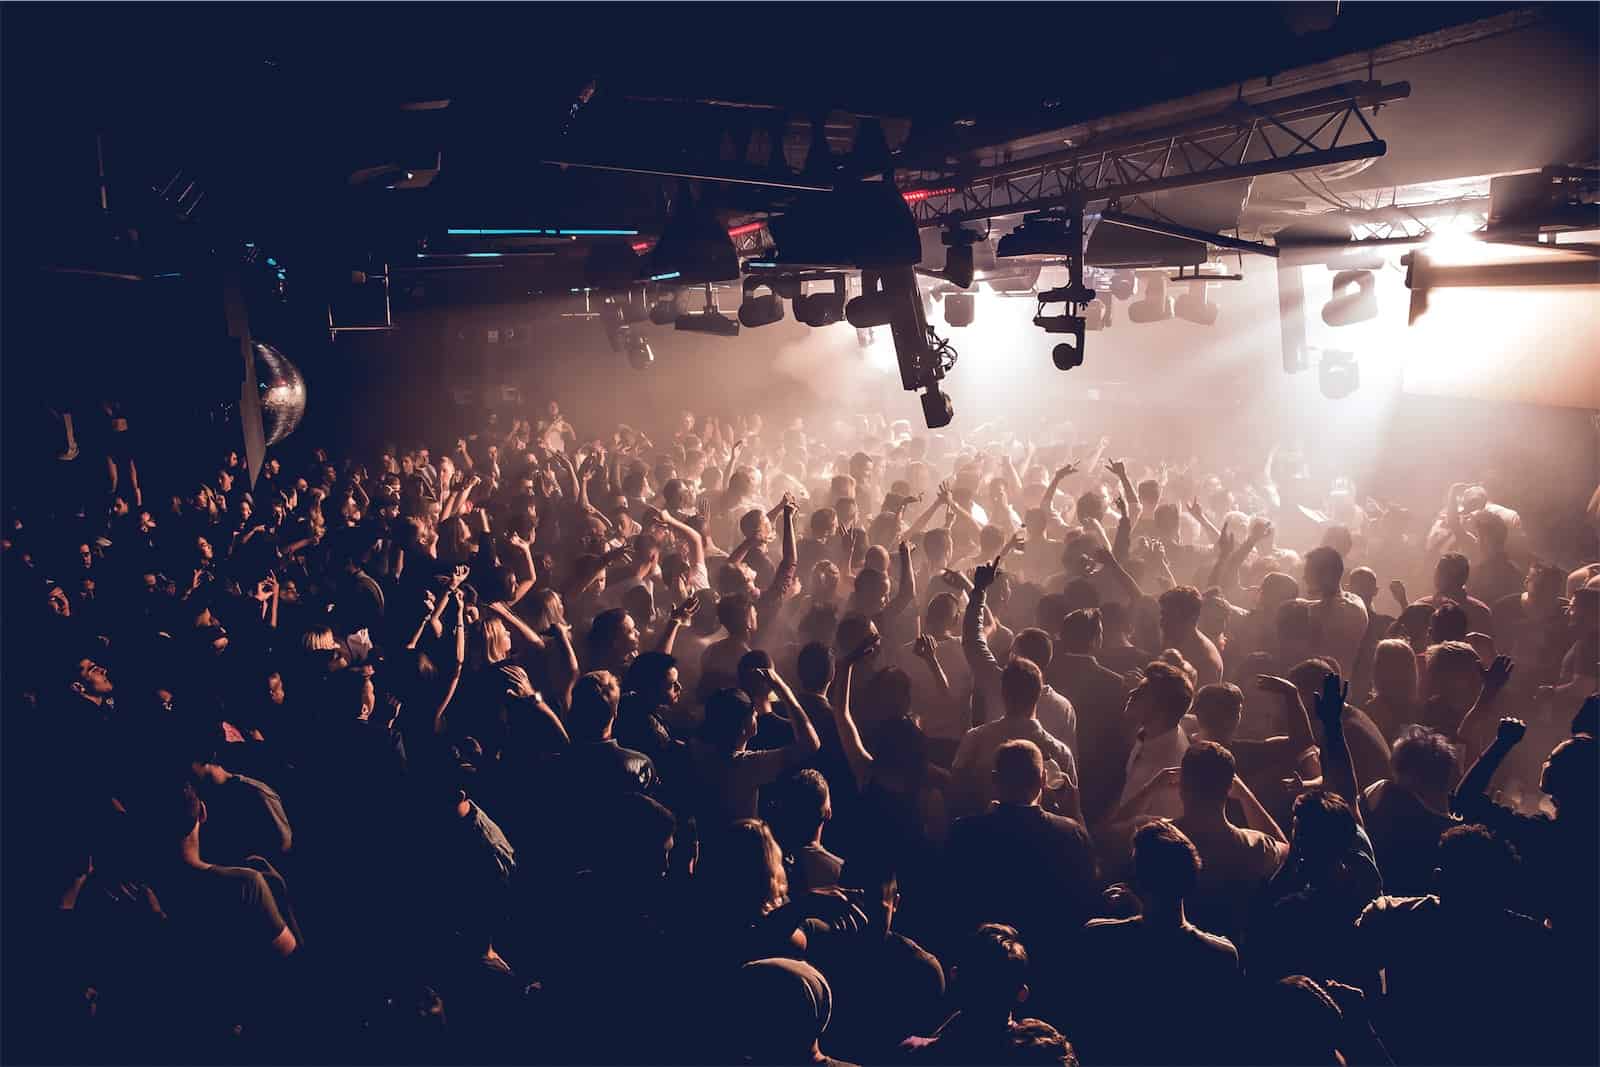 Ministry Of Sound Classical returns to London in early 2021